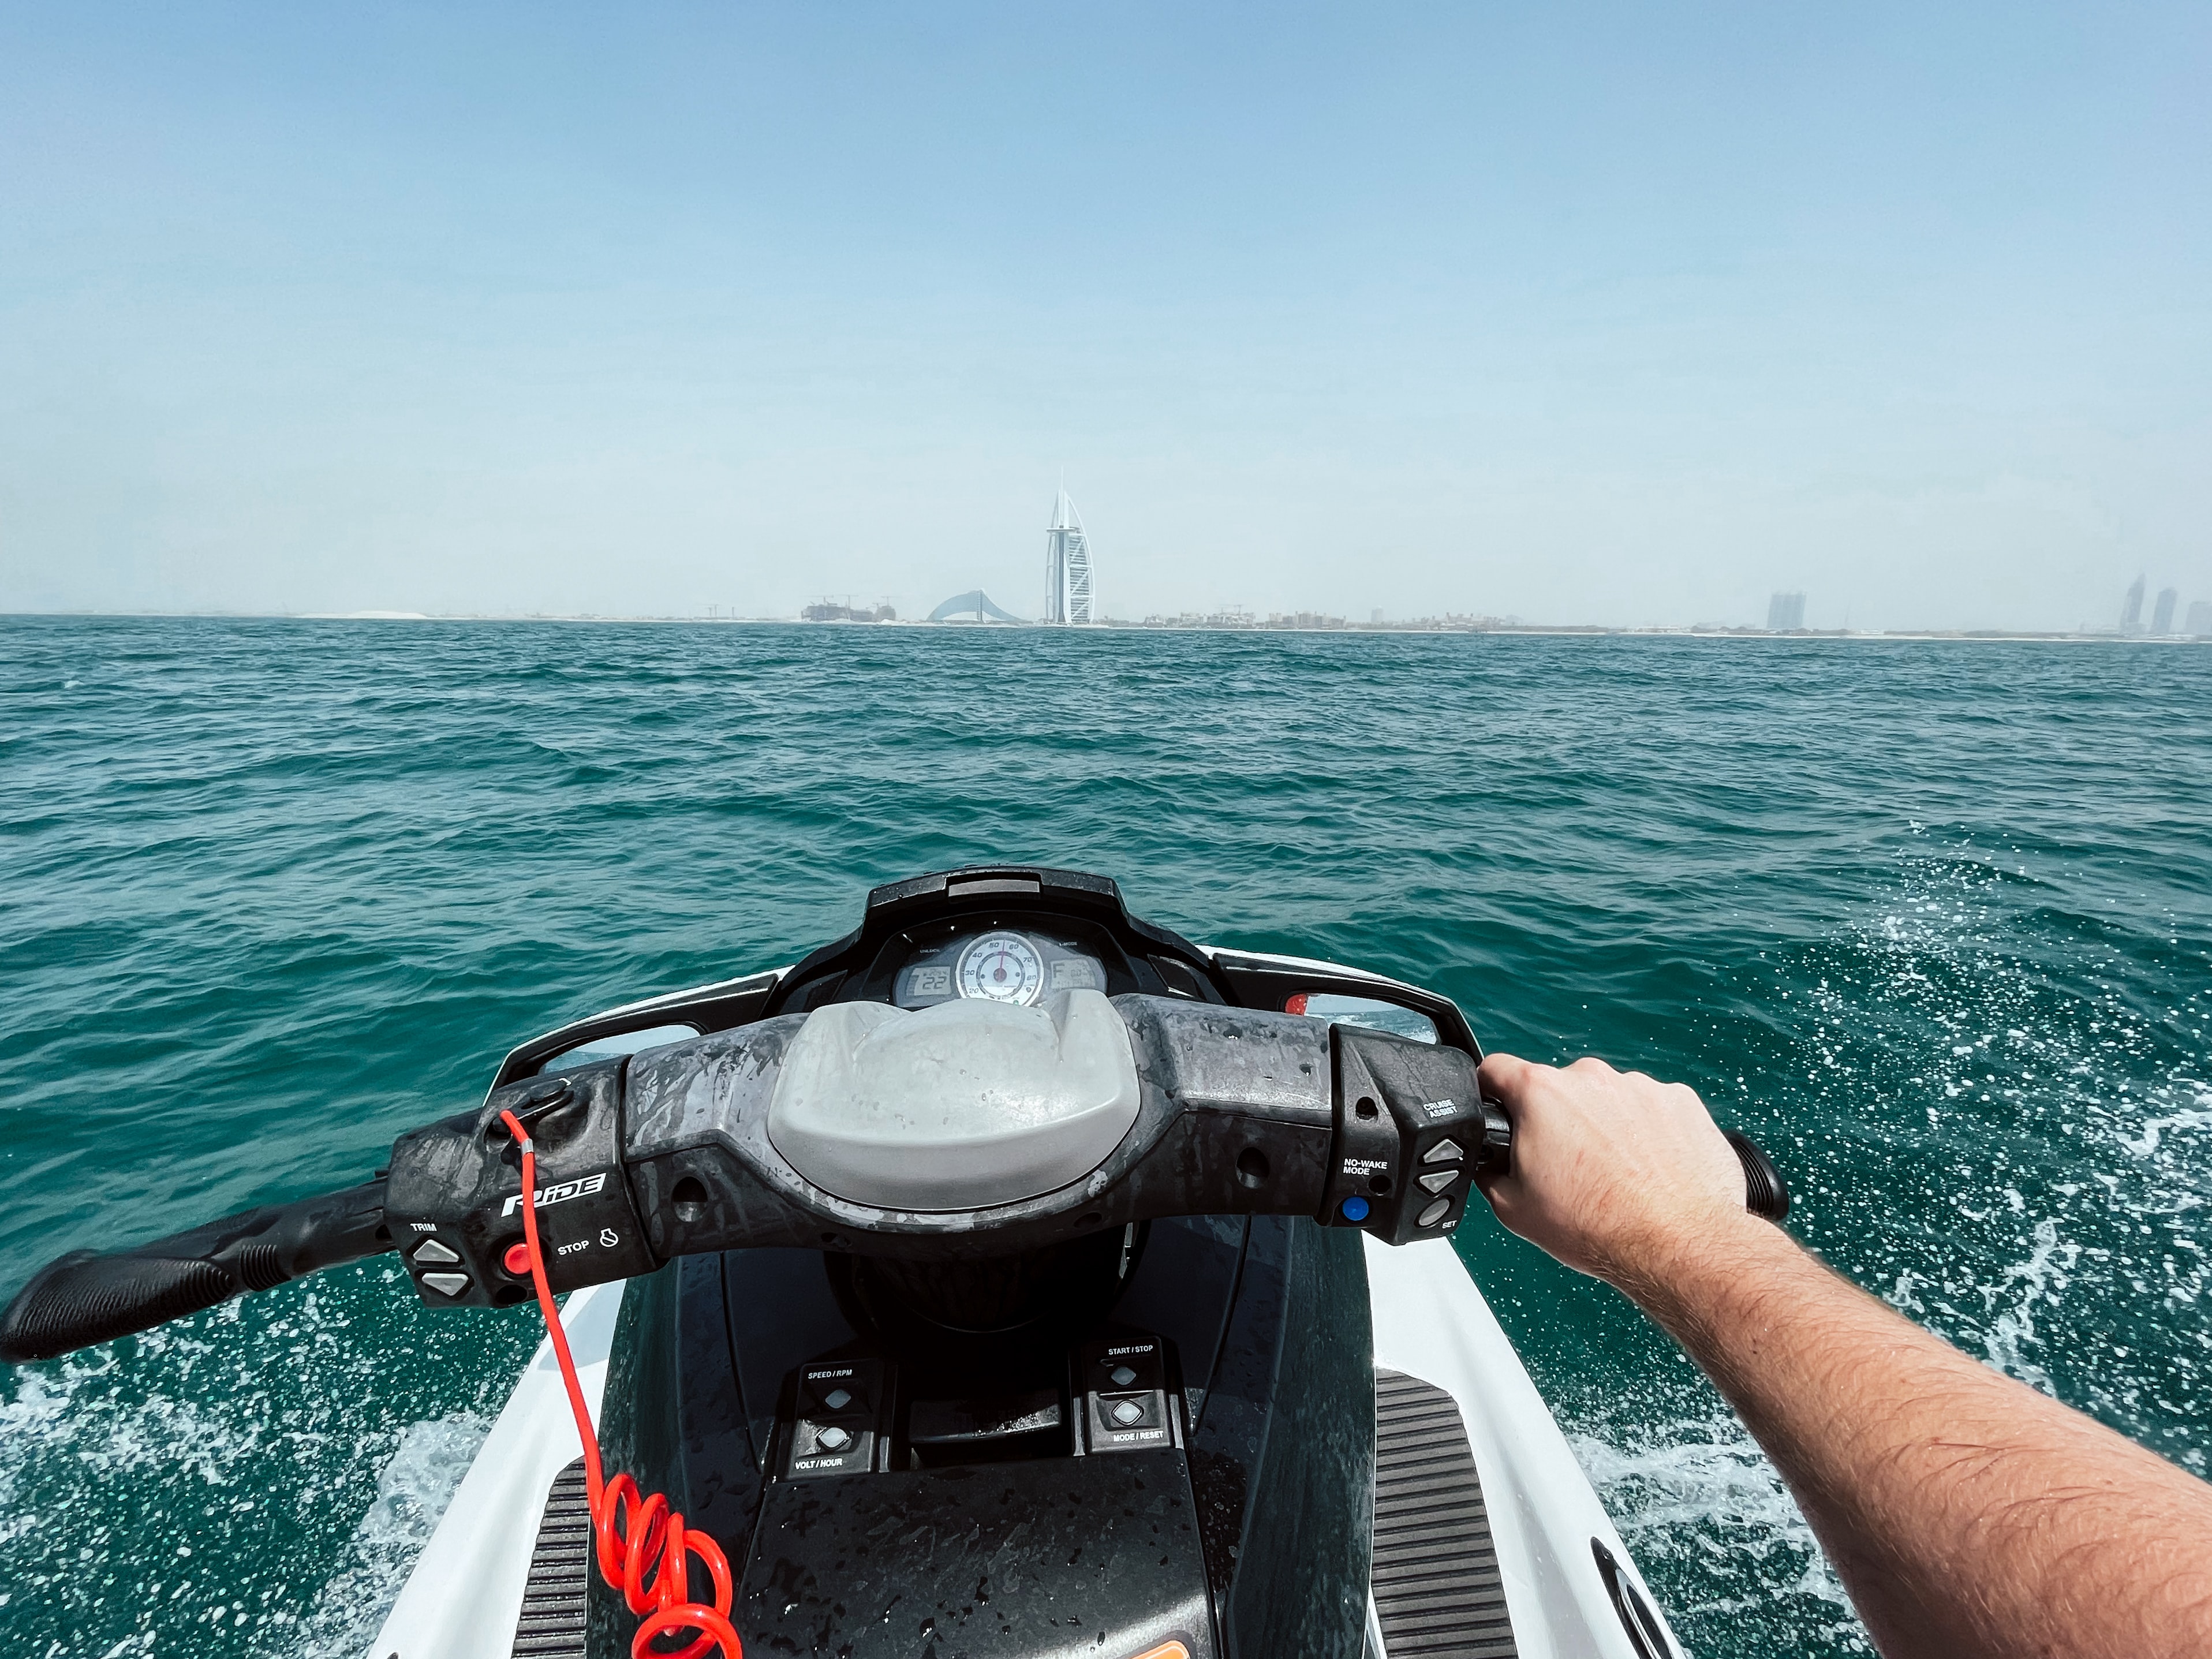 How Fast Does a Jet Ski Go? We Answer the Most Common FAQs